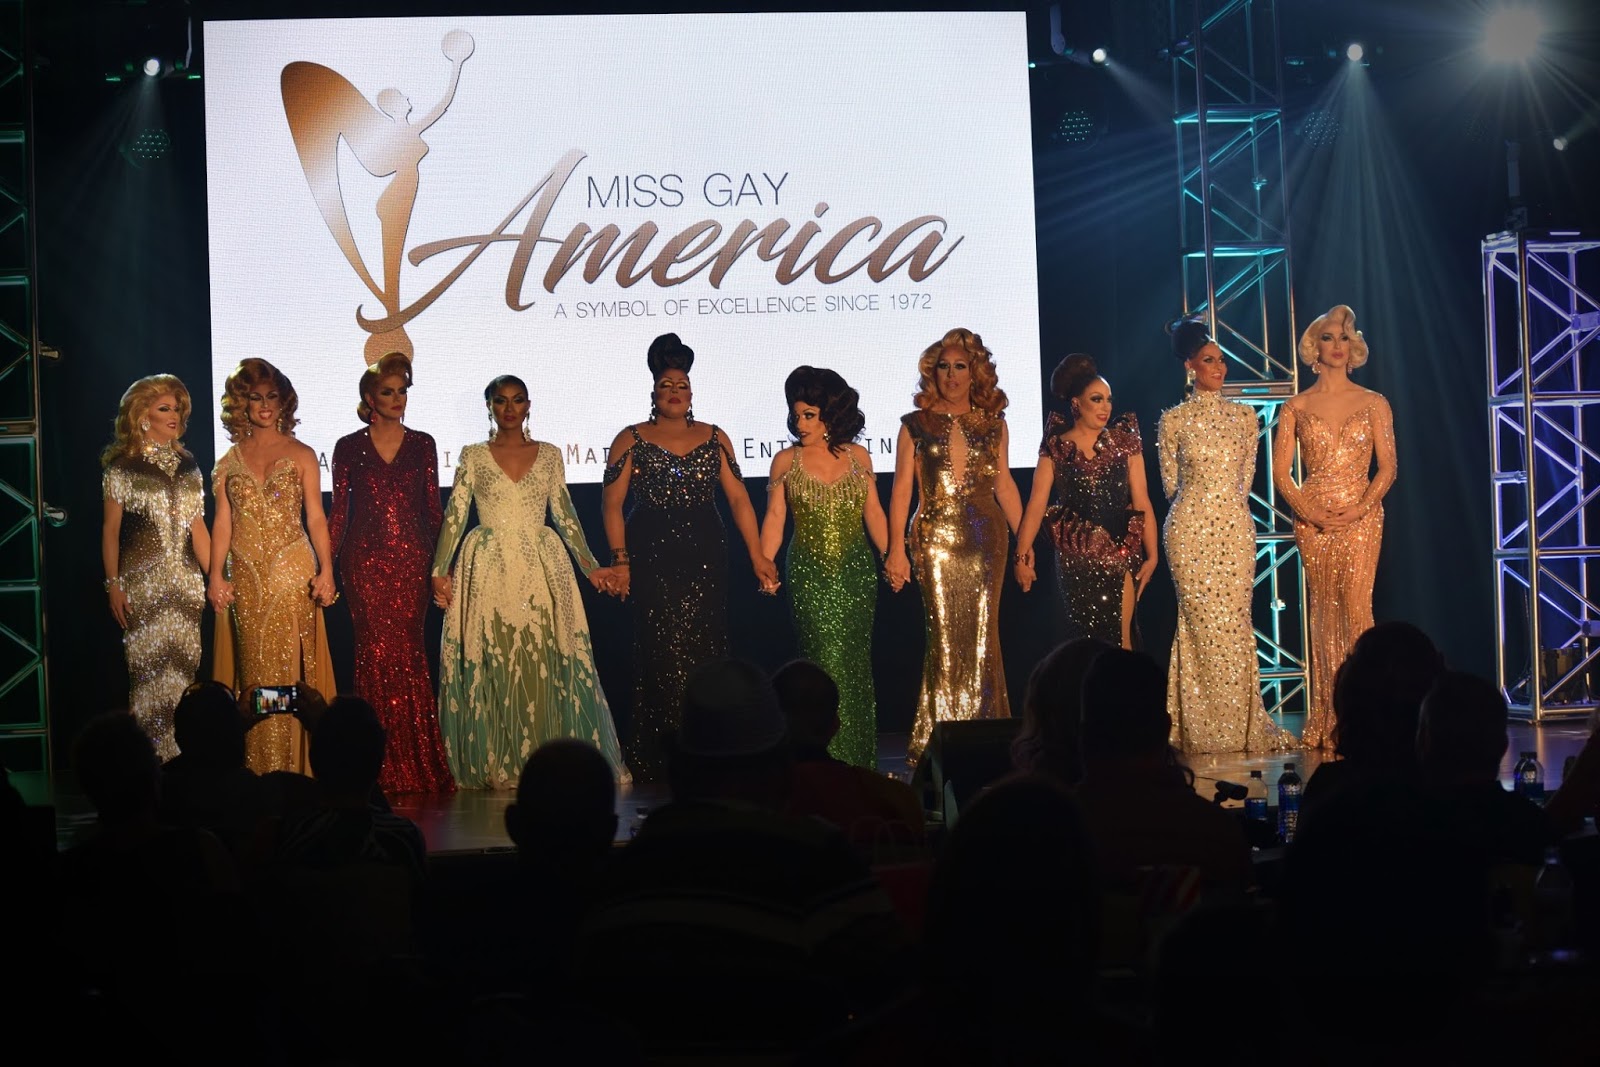 Miss Gay America Pageant - Preliminary Night 2 at Robinson Center